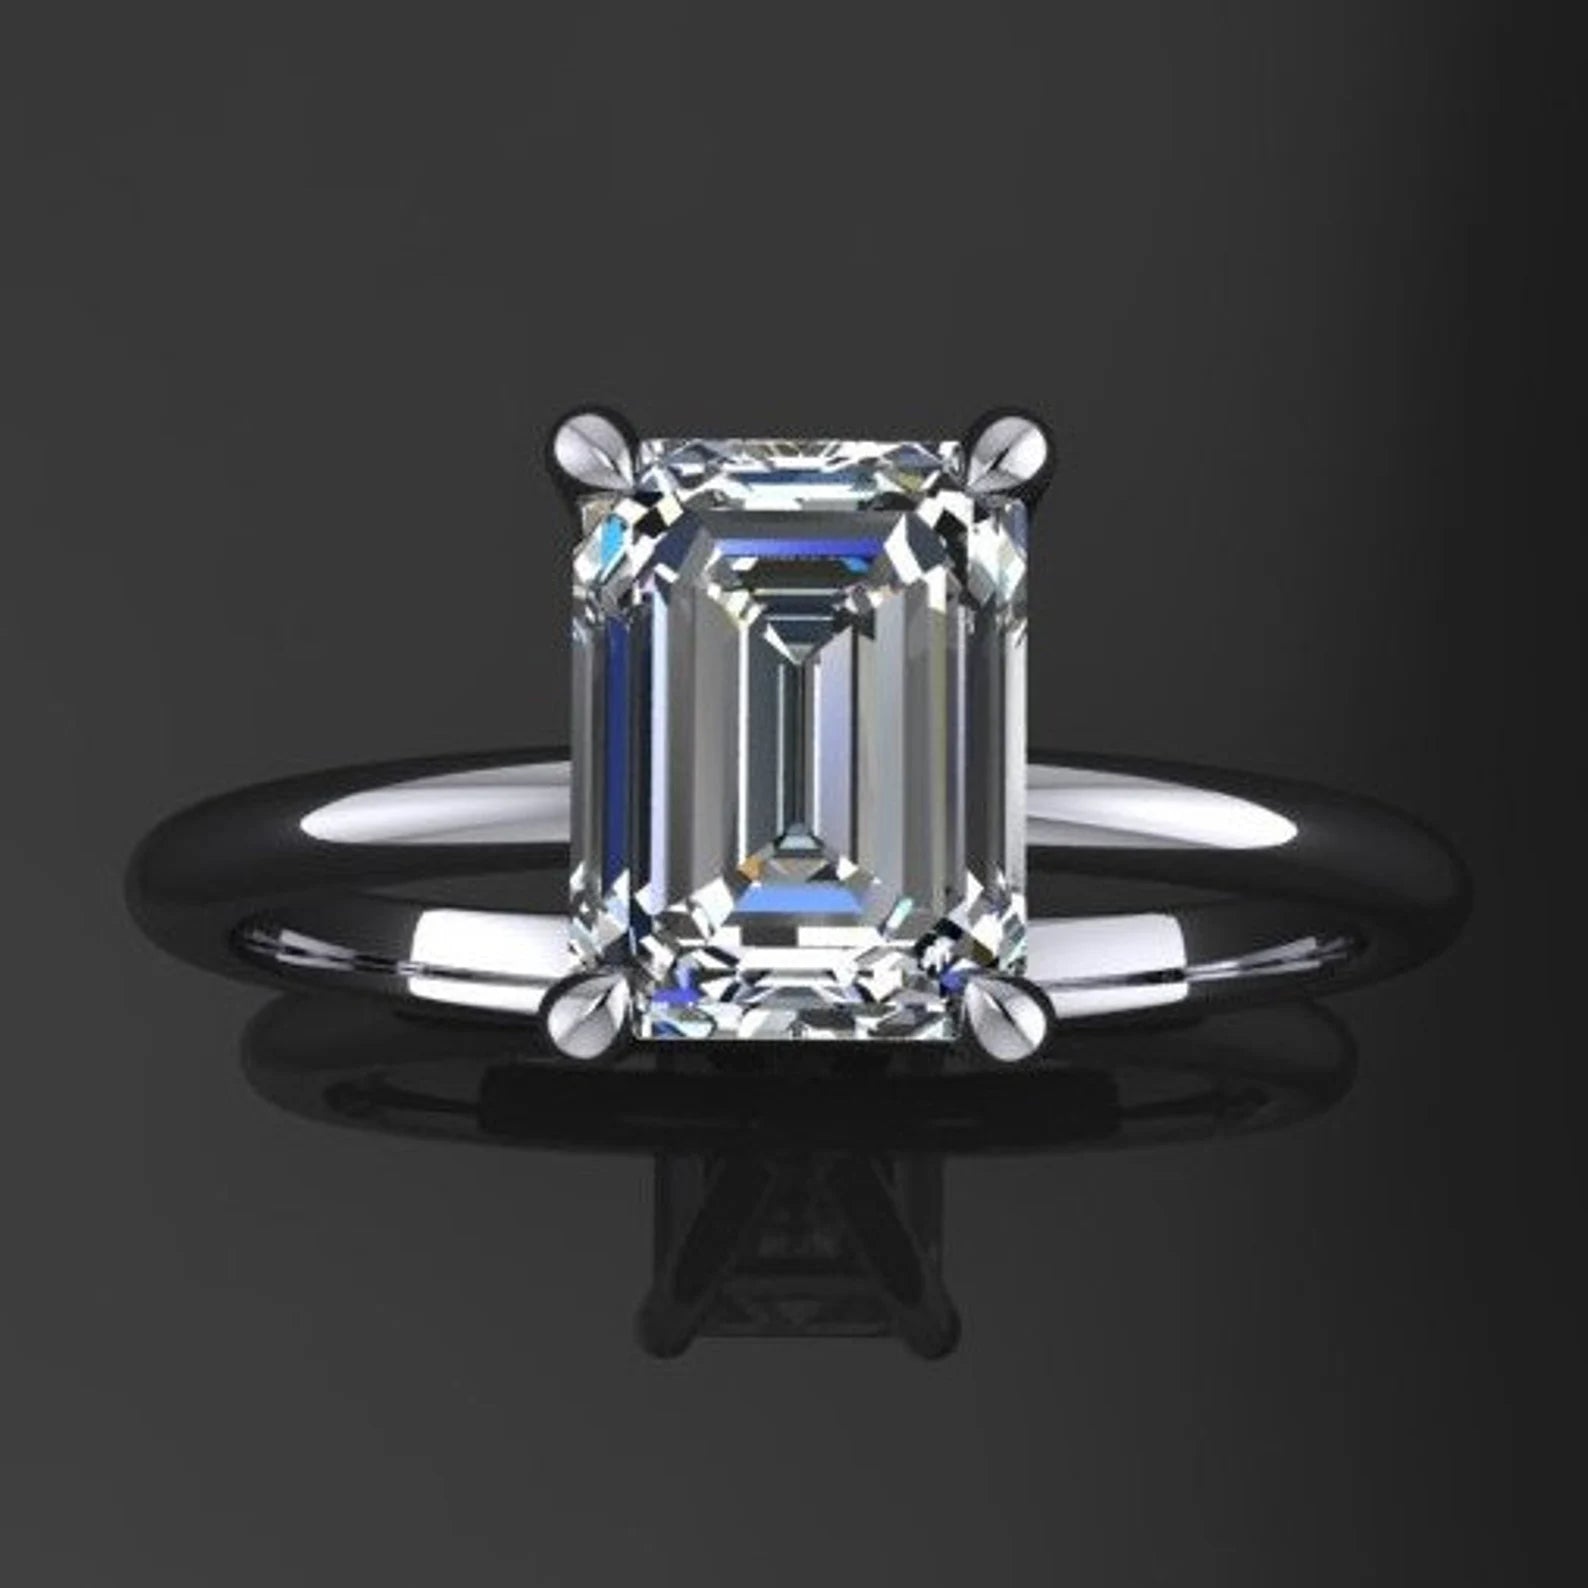 ready to ship - naked shay ring - 2 carat emerald cut round NEO moissanite engagement ring - J Hollywood Designs